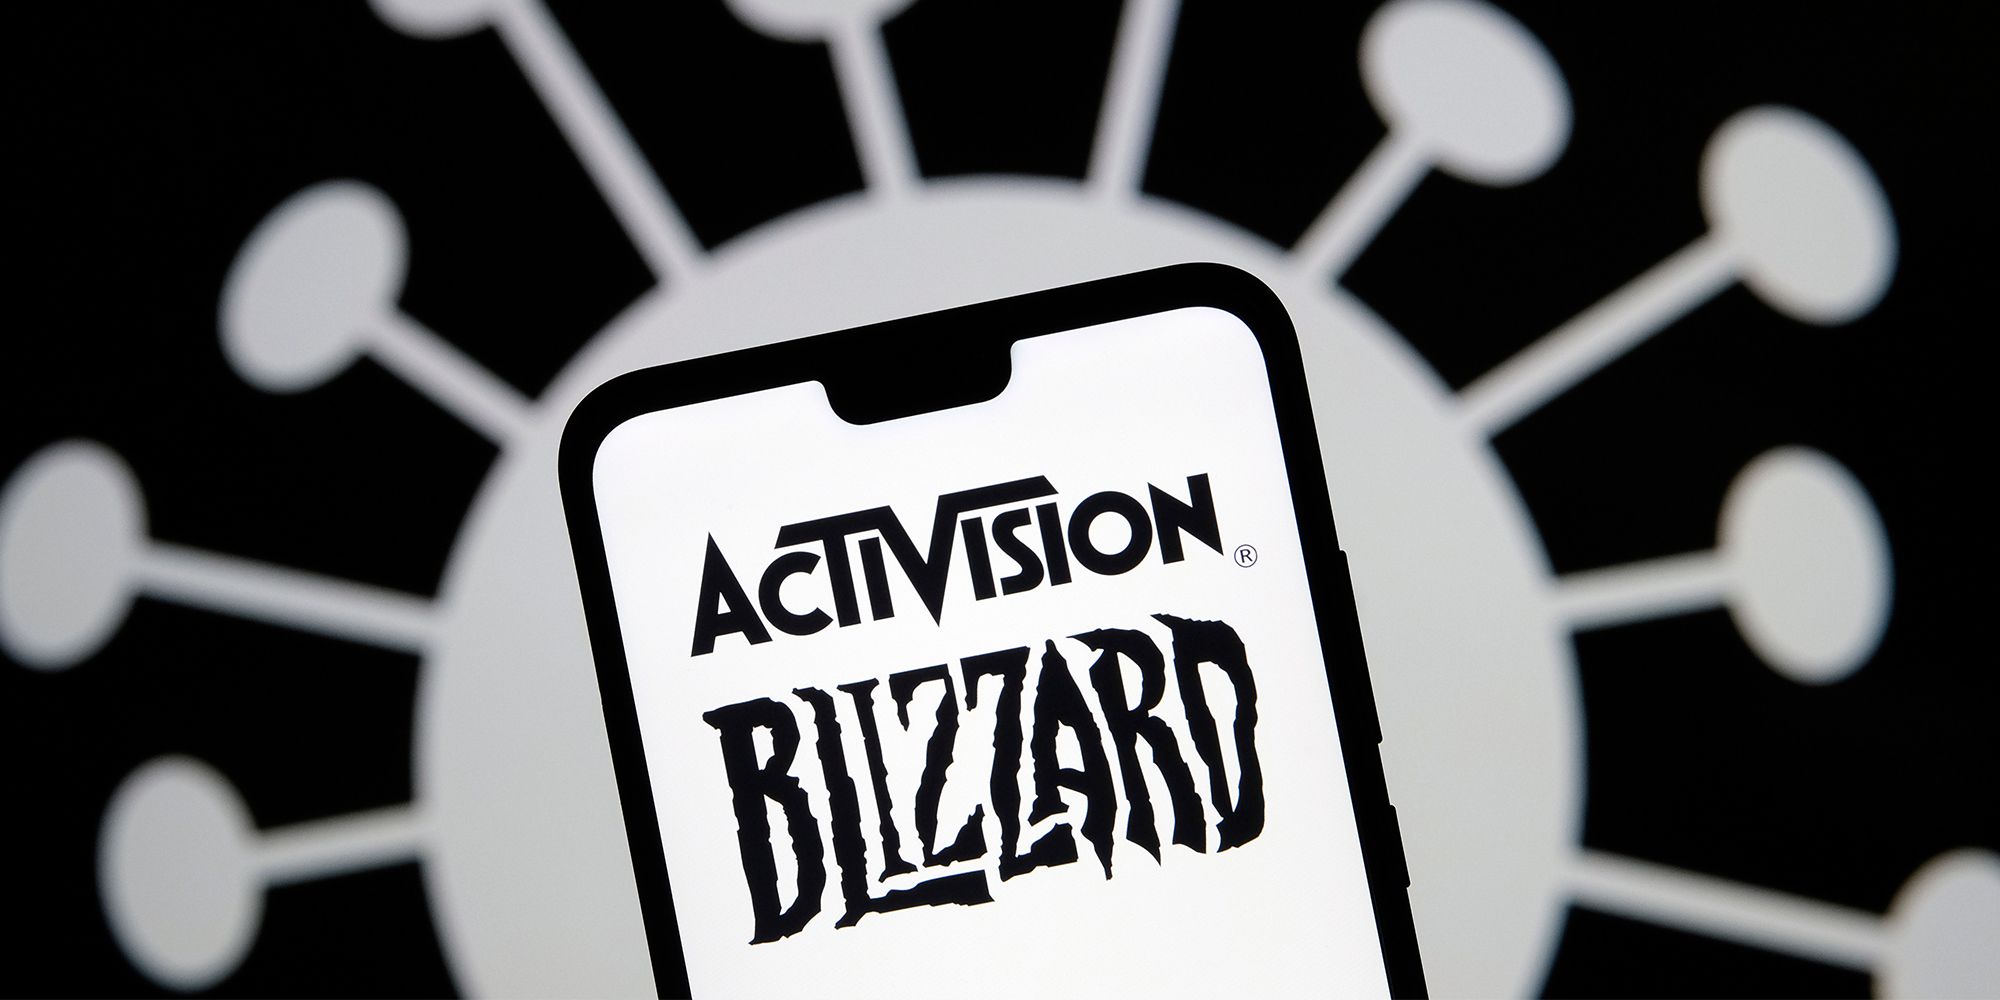 Activision Blizzard logo on a mobile phone on a black background with a white circle that splits into white lines ending in more white circles